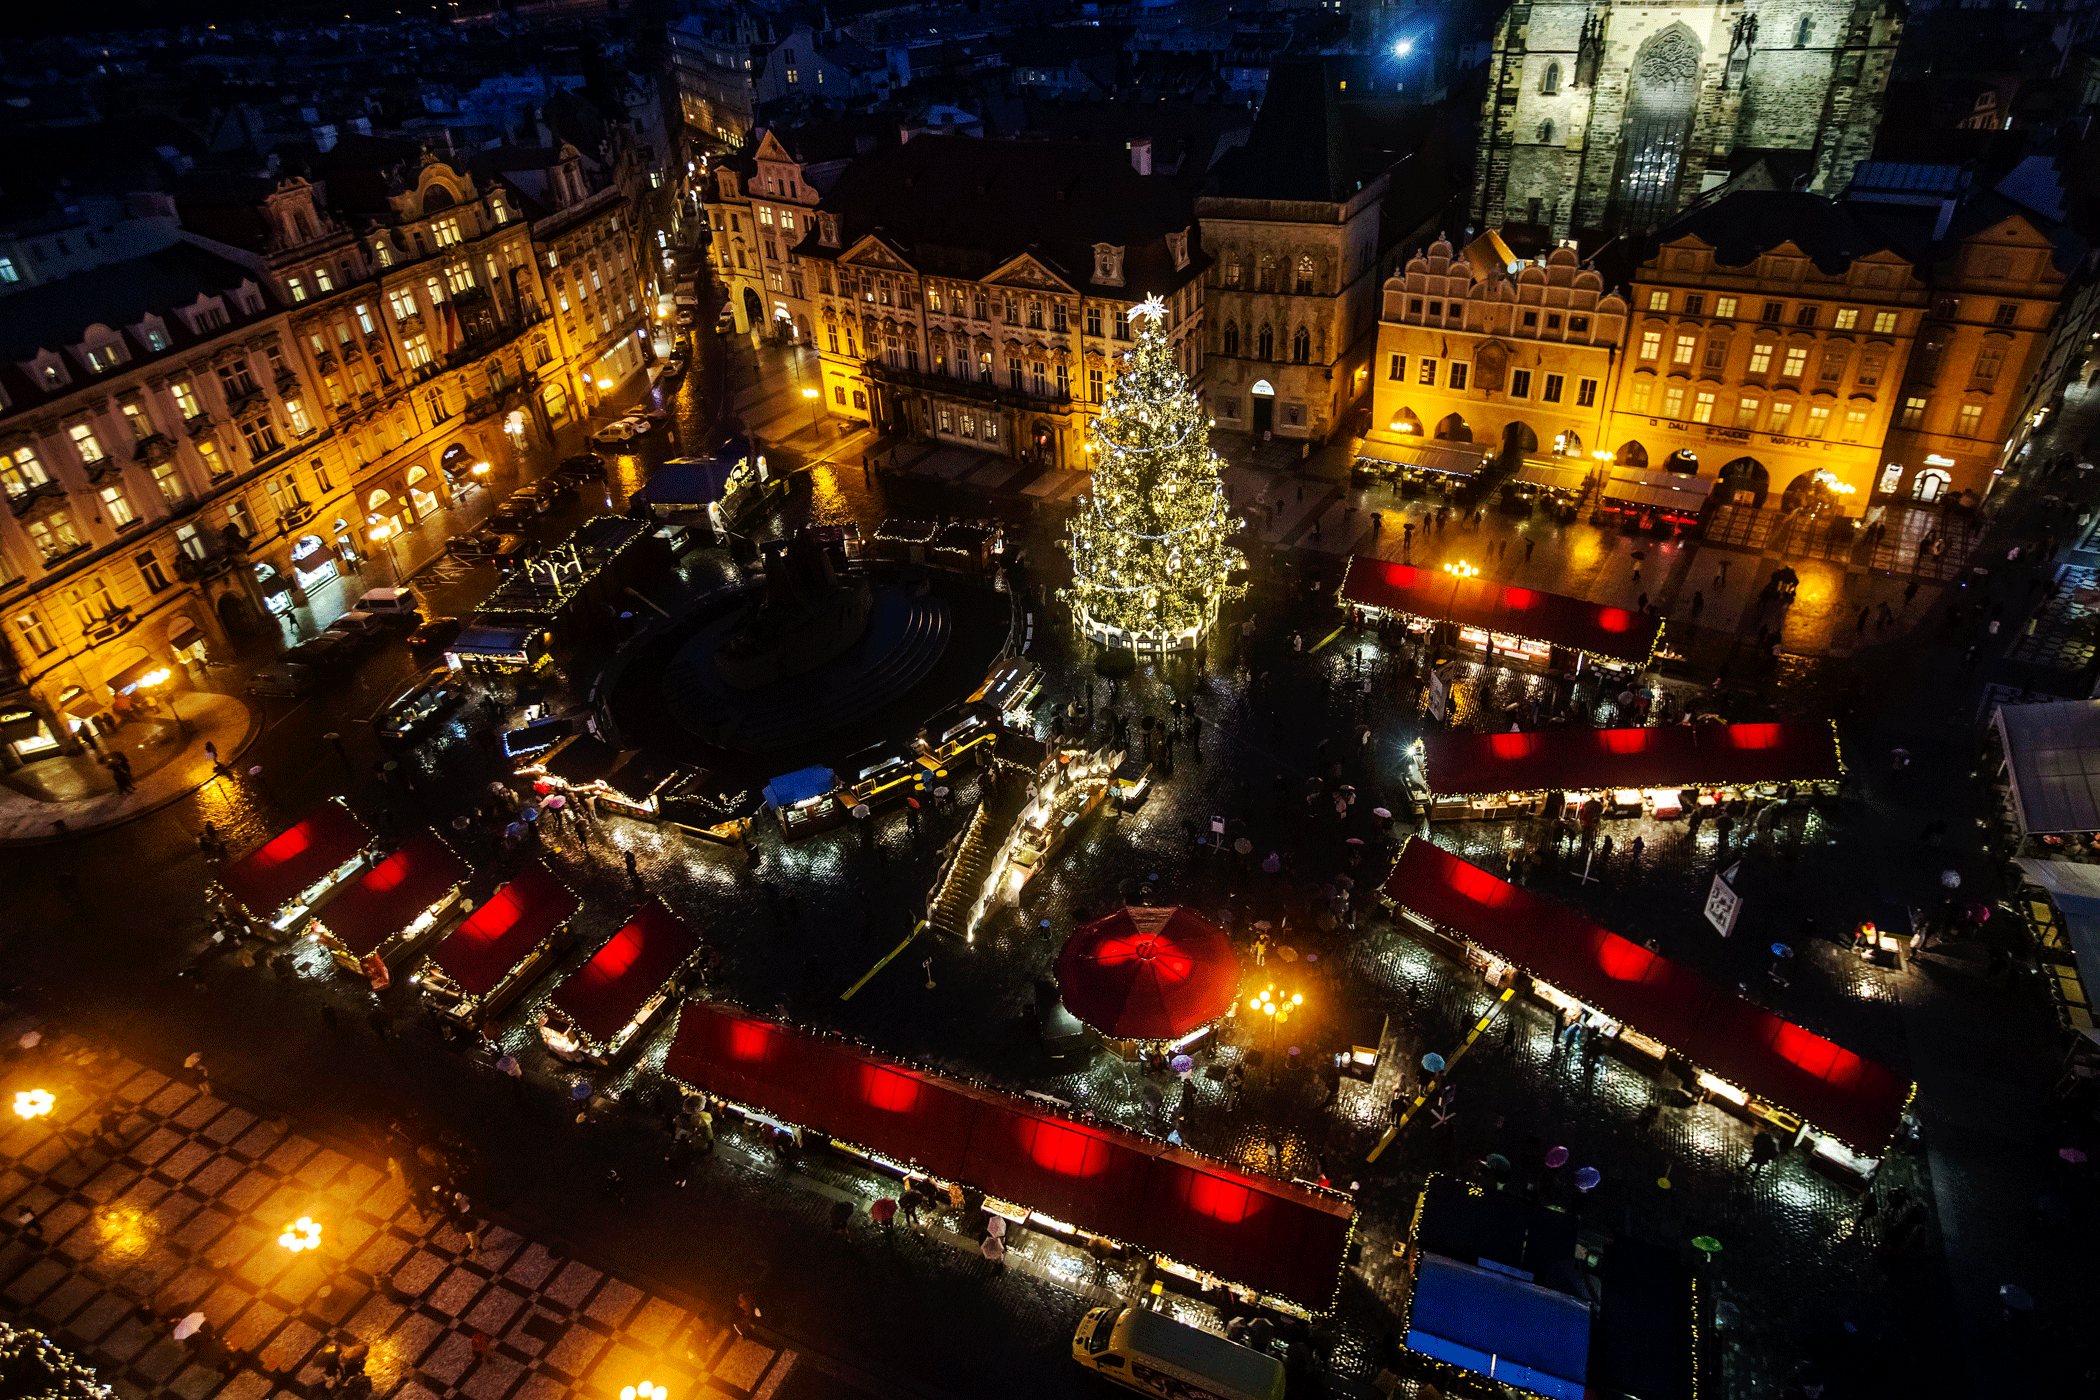 The Old Town Square and Christmas tree are illuminated at the Christmas market in Prague on Nov. 30, 2015. (Photo by Matej Divizna/Getty Images)